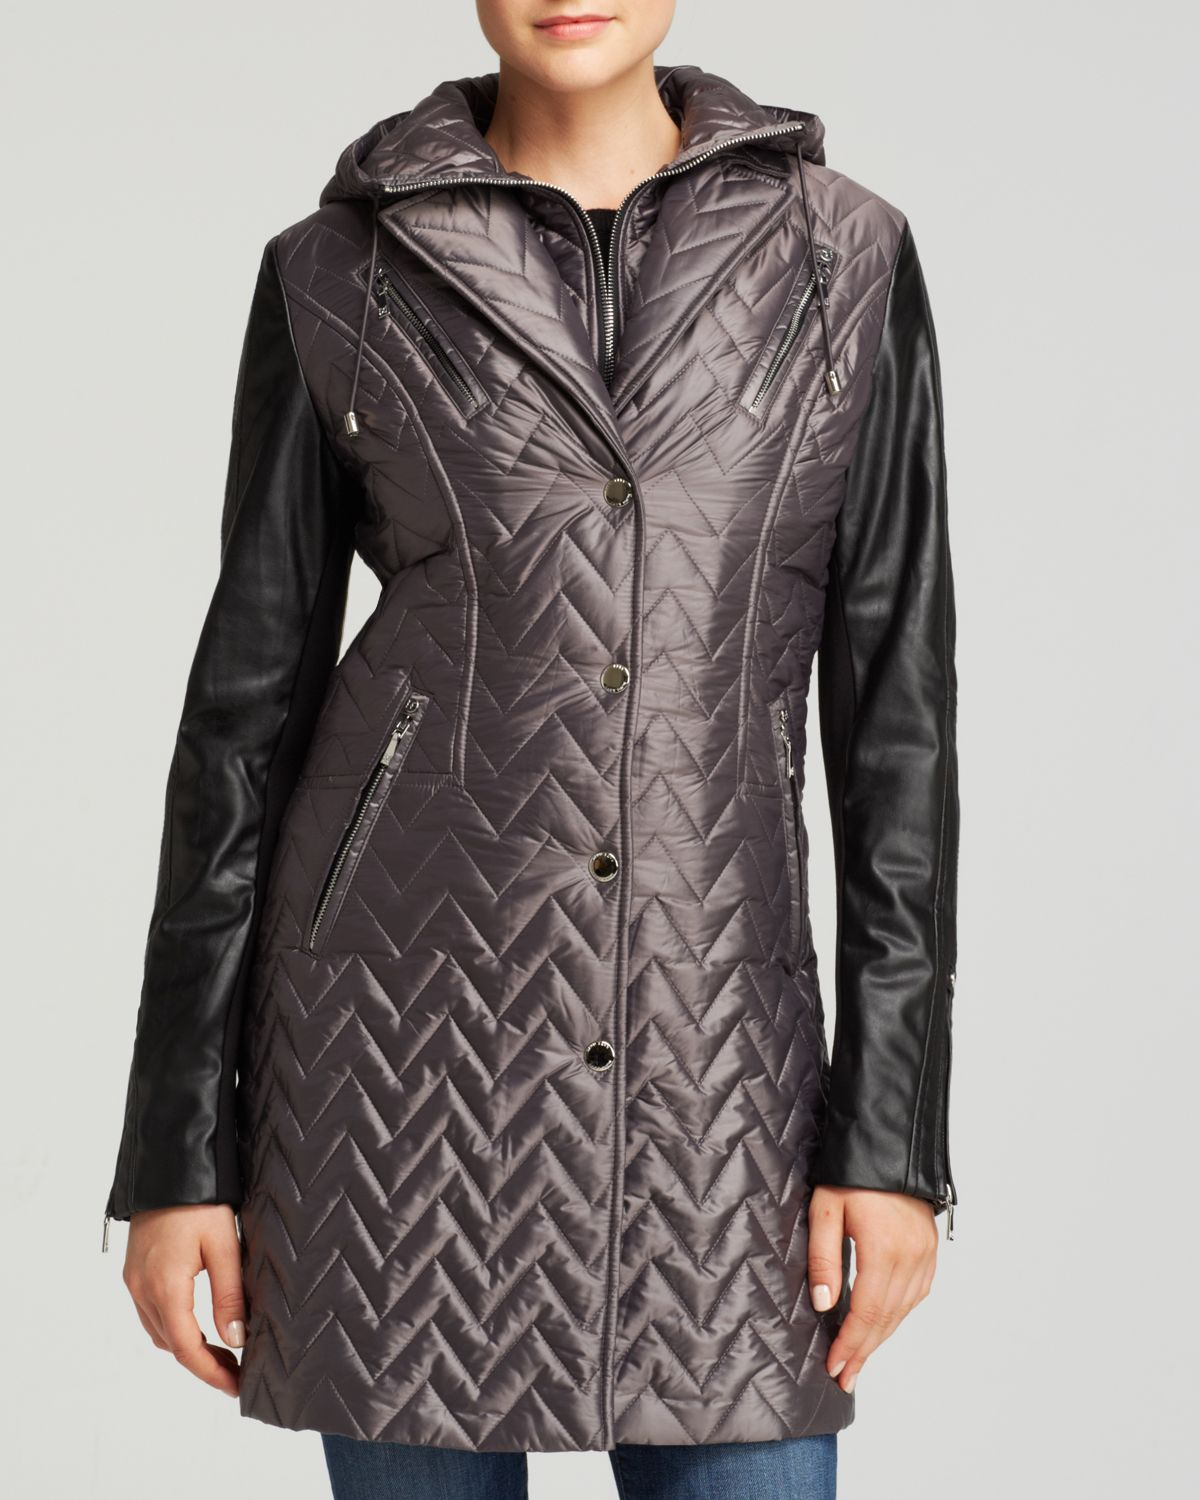 Dawn Levy Sly Ii Coat With Leather Sleeves in Gray (Grey) | Lyst